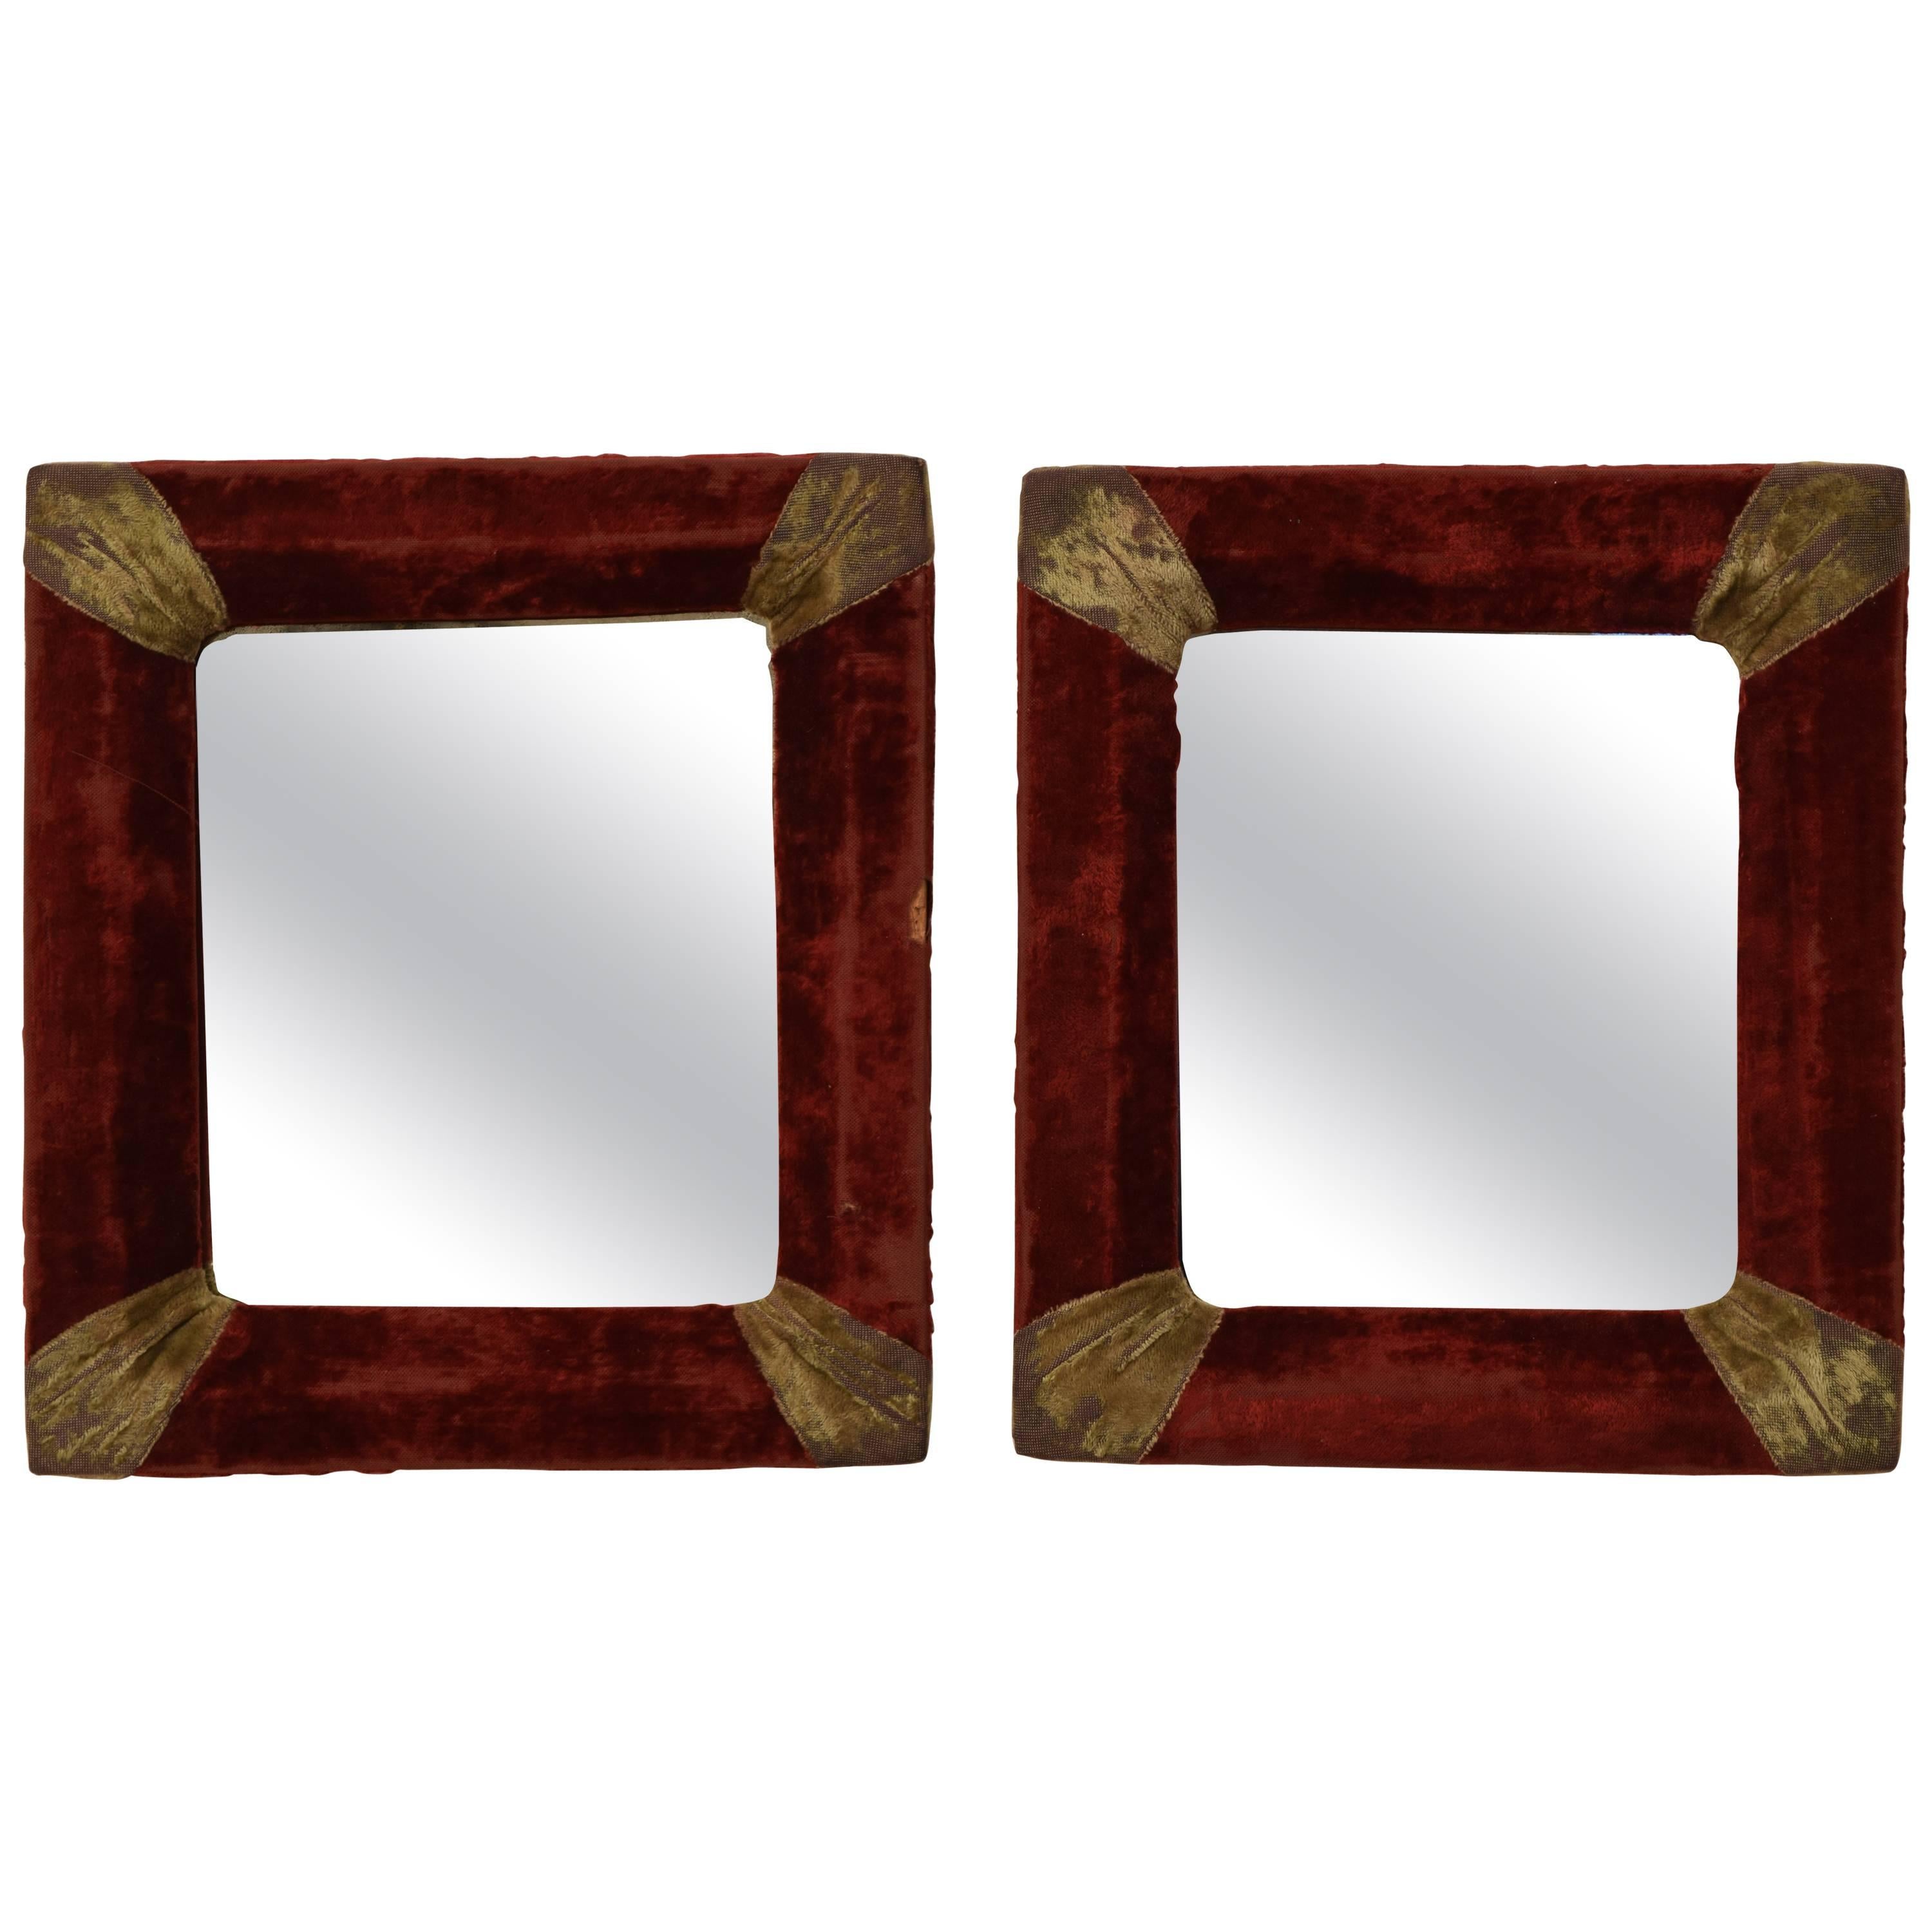 Pair of Italian Baroque Velvet Covered Frames with Later Mirror Plates